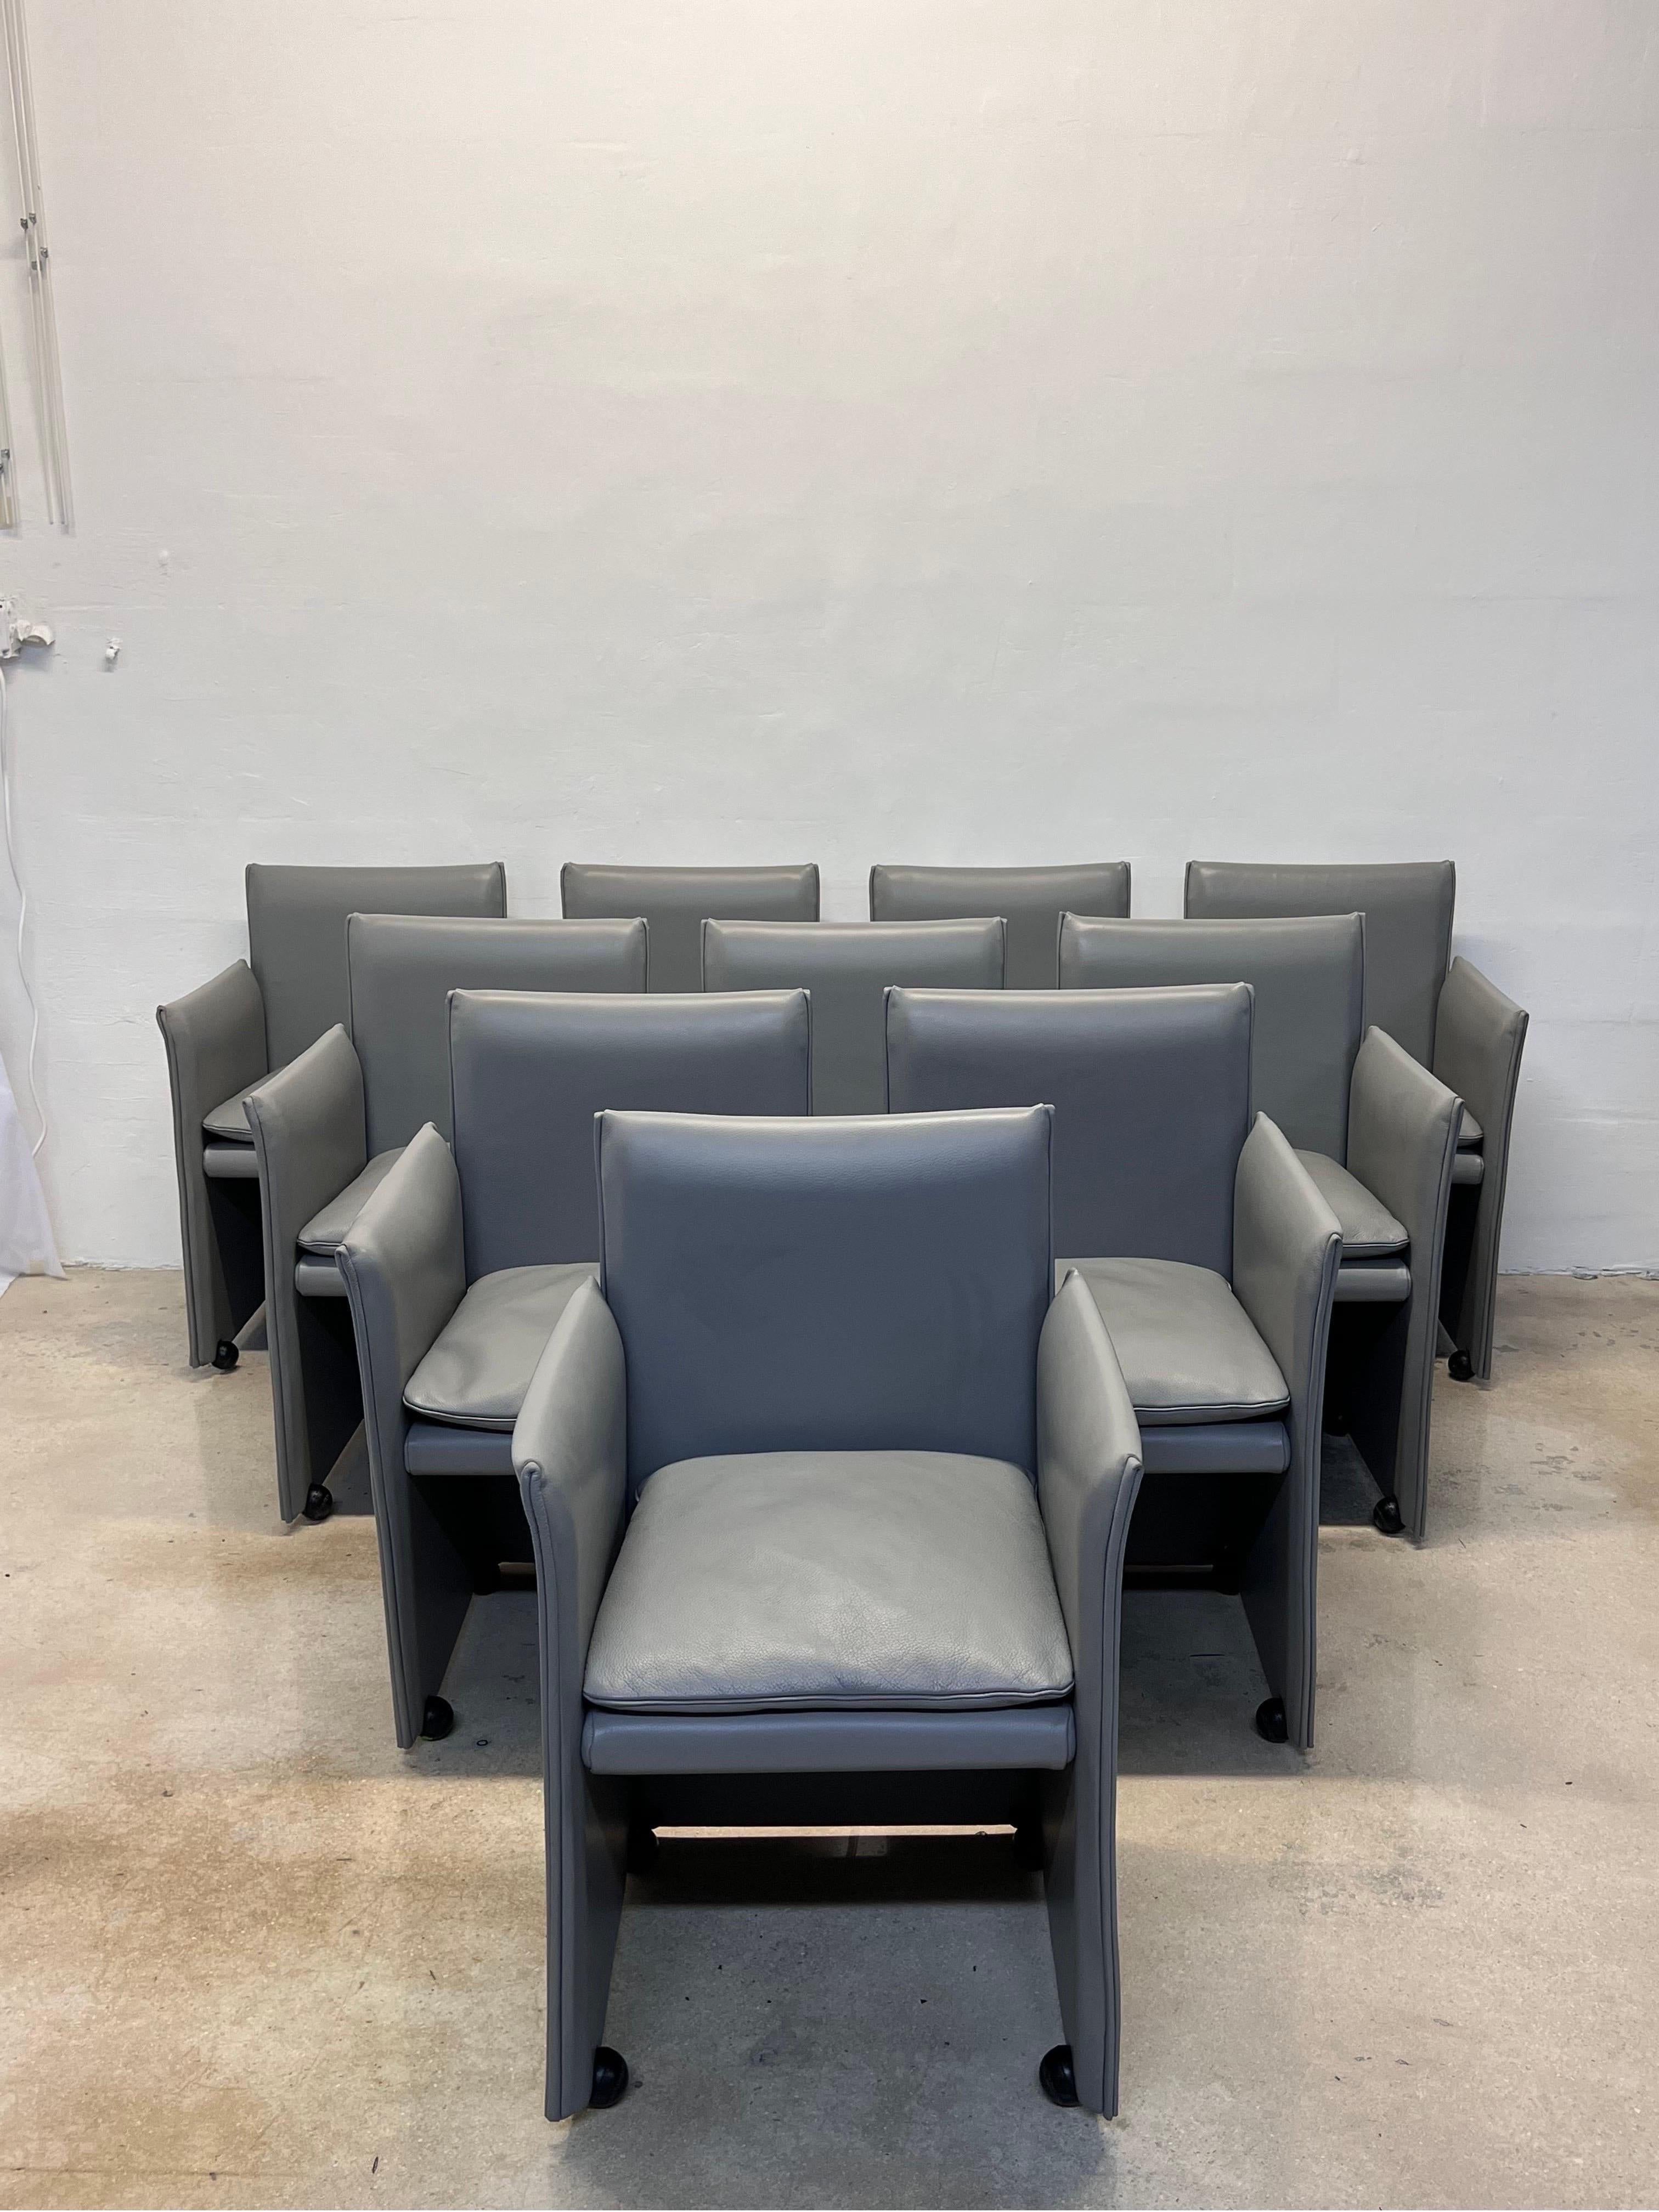 Rare set of ten gray leather 401 Break dining arm chairs on casters designed by Mario Bellini for Cassina Spa. The chairs have soft down filled cushions and the leather is wrapped over a steel frame.

Arm Height: 26